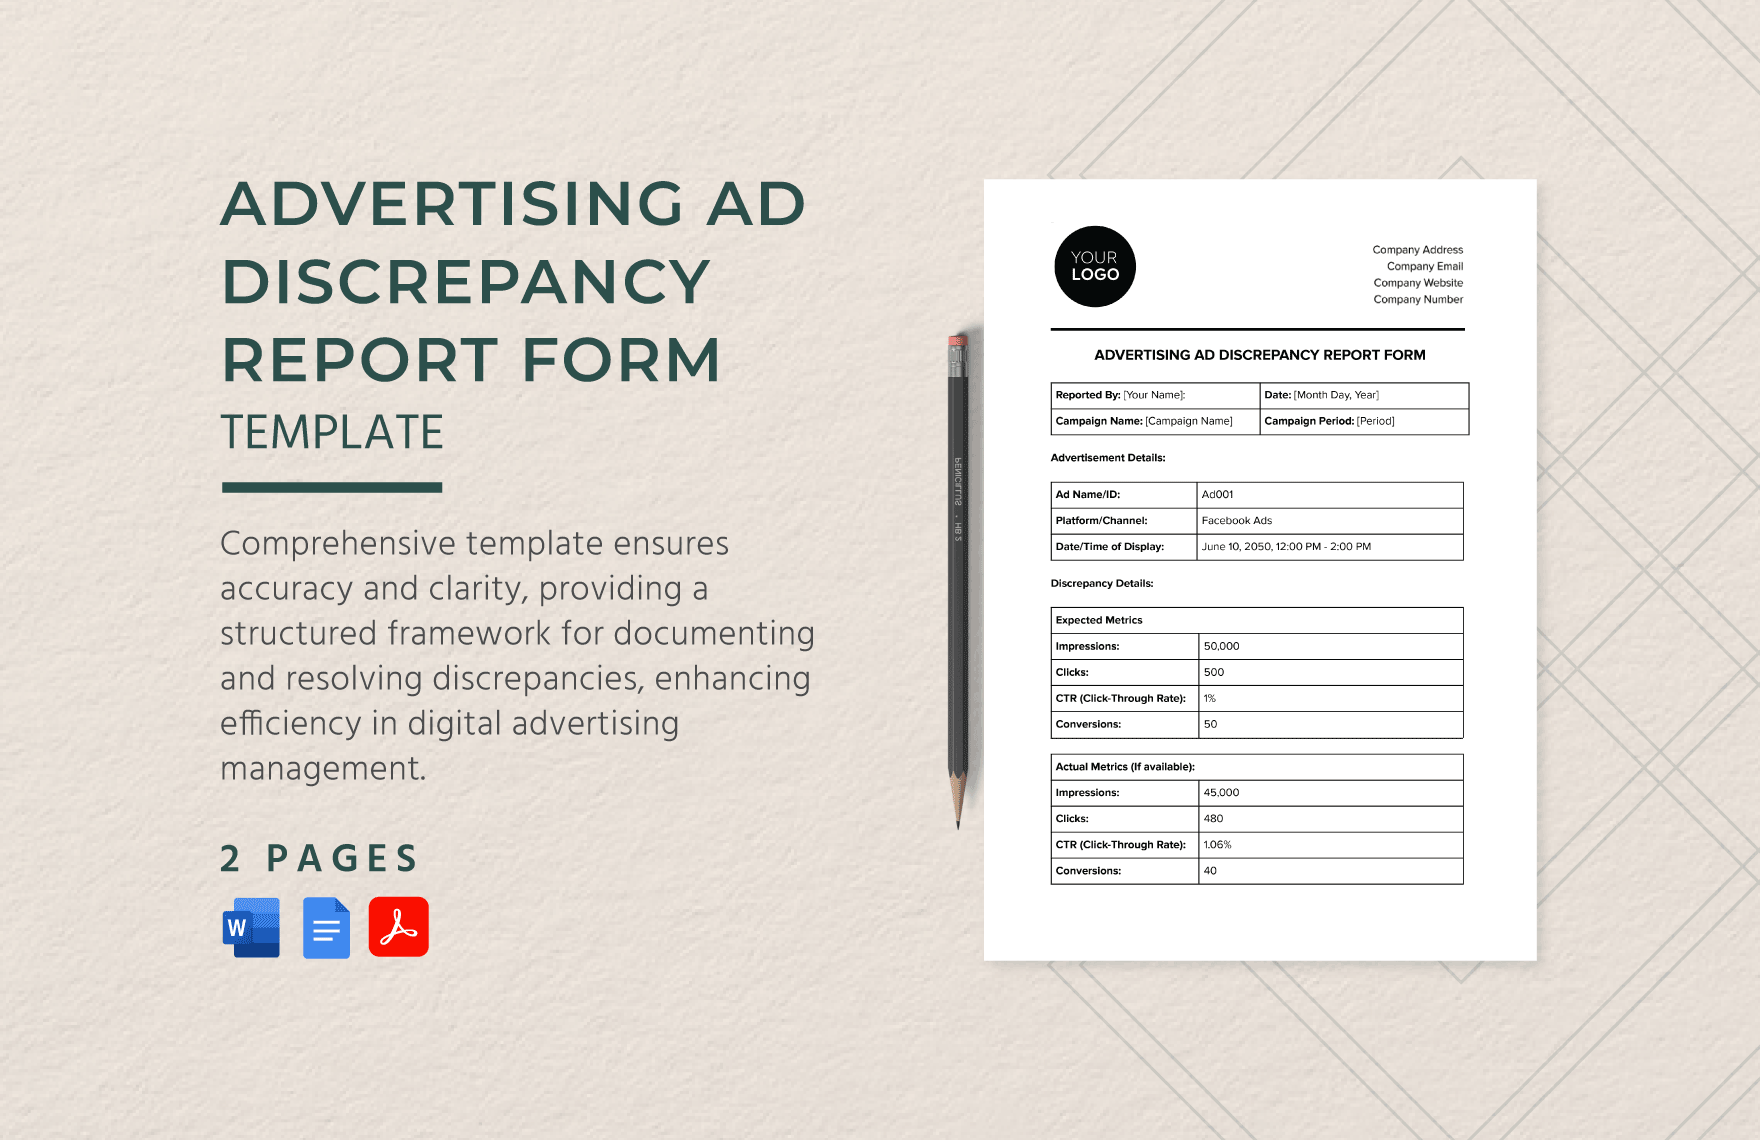 Advertising Ad Discrepancy Report Form Template in Word, Google Docs, PDF